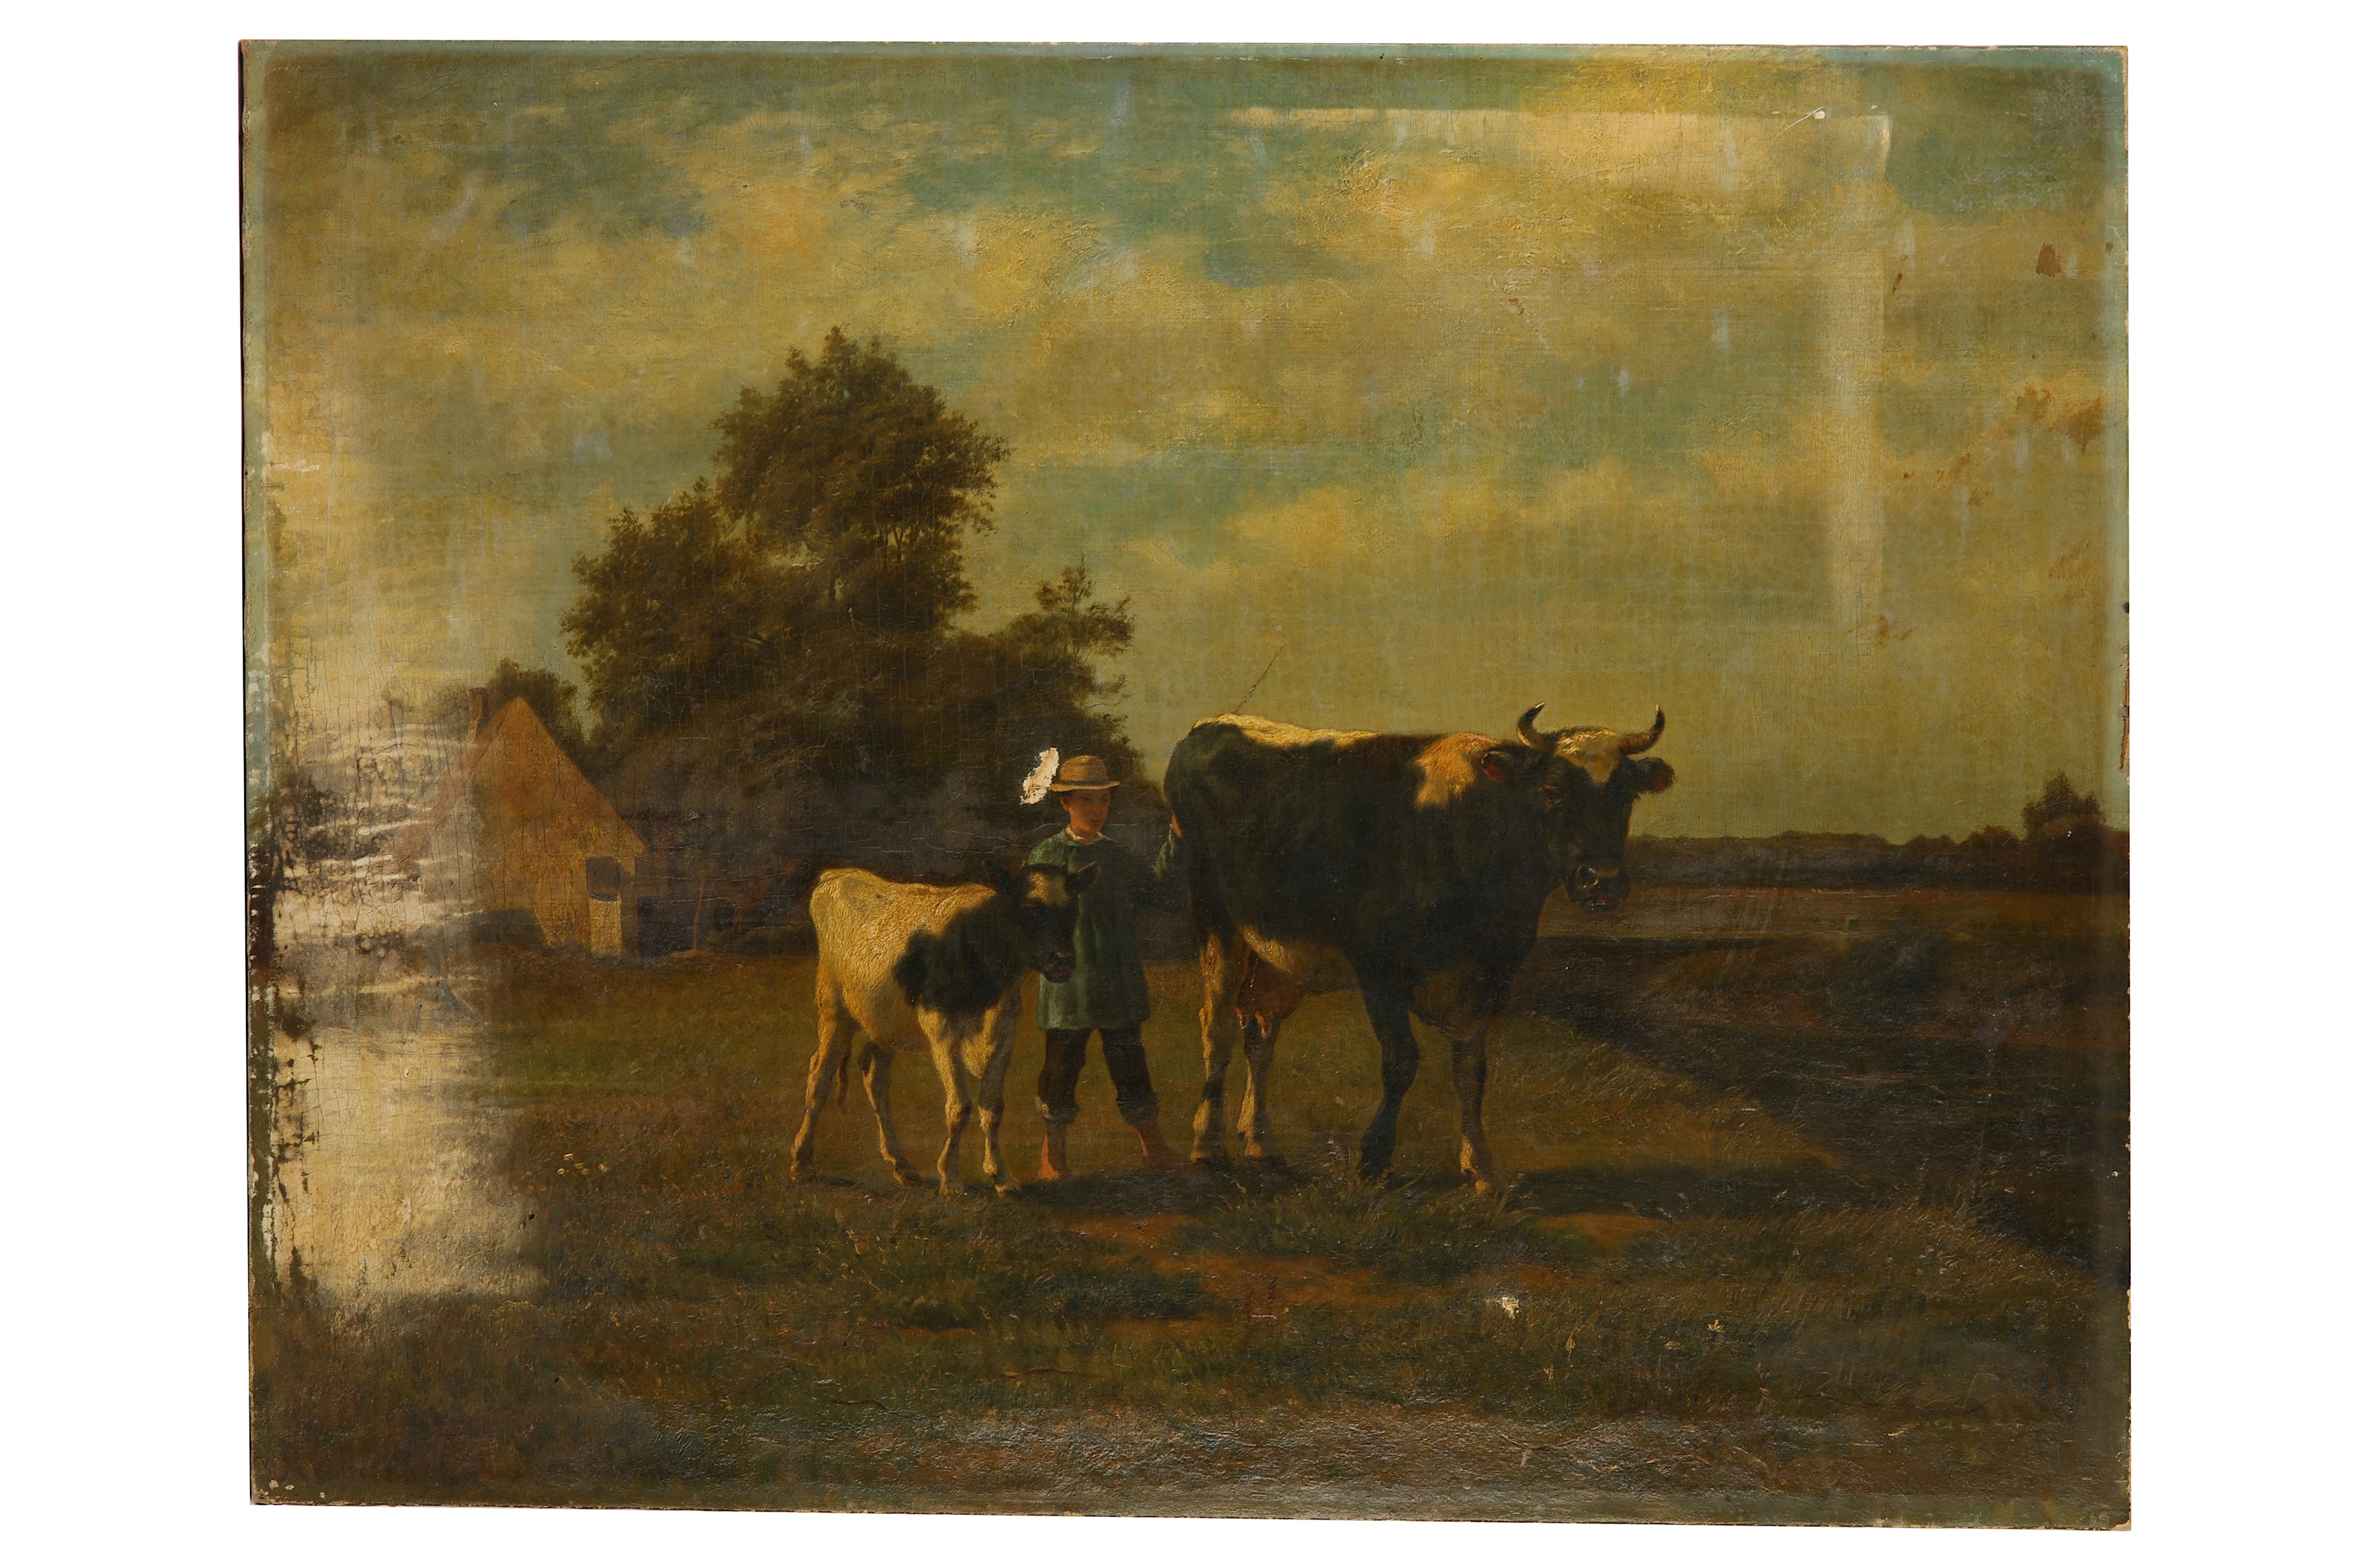 GERMAN SCHOOL (lATE 19TH CENTURY) The Young Herder, Oil on canvas 74 x 93 cm